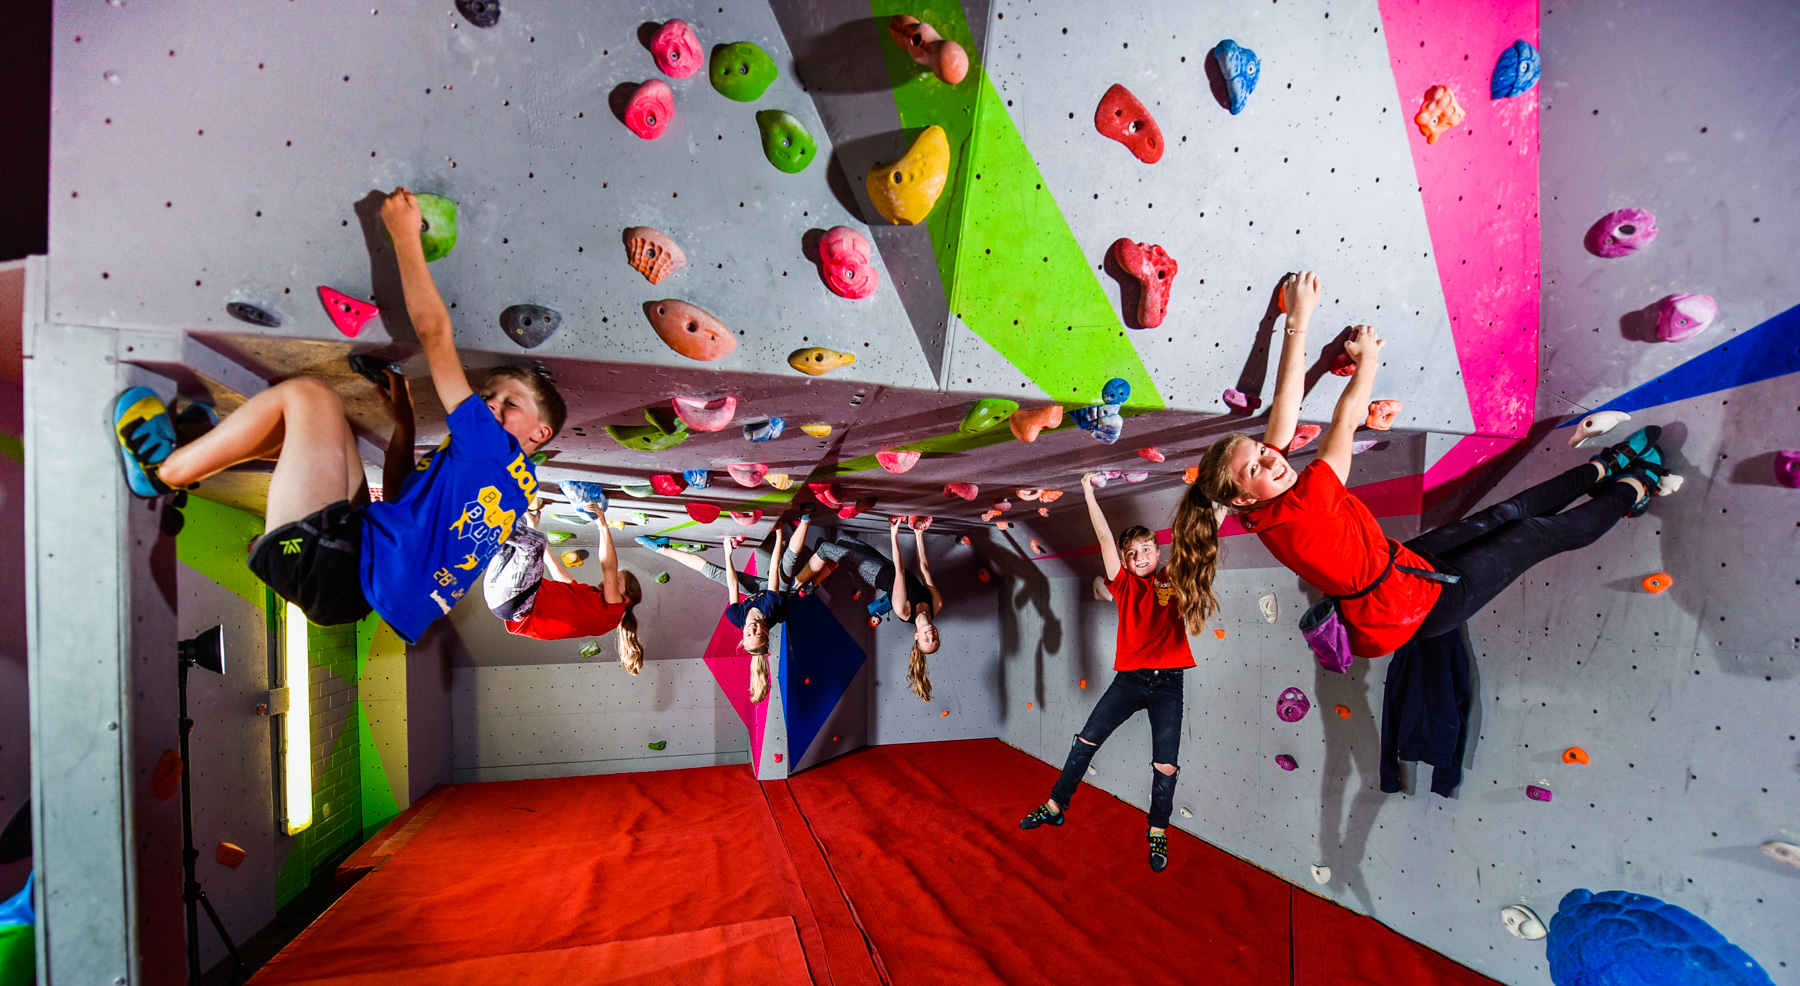 Exciting brand-new climbing and play experience opens its doors in Cardiff  - The Cardiff News